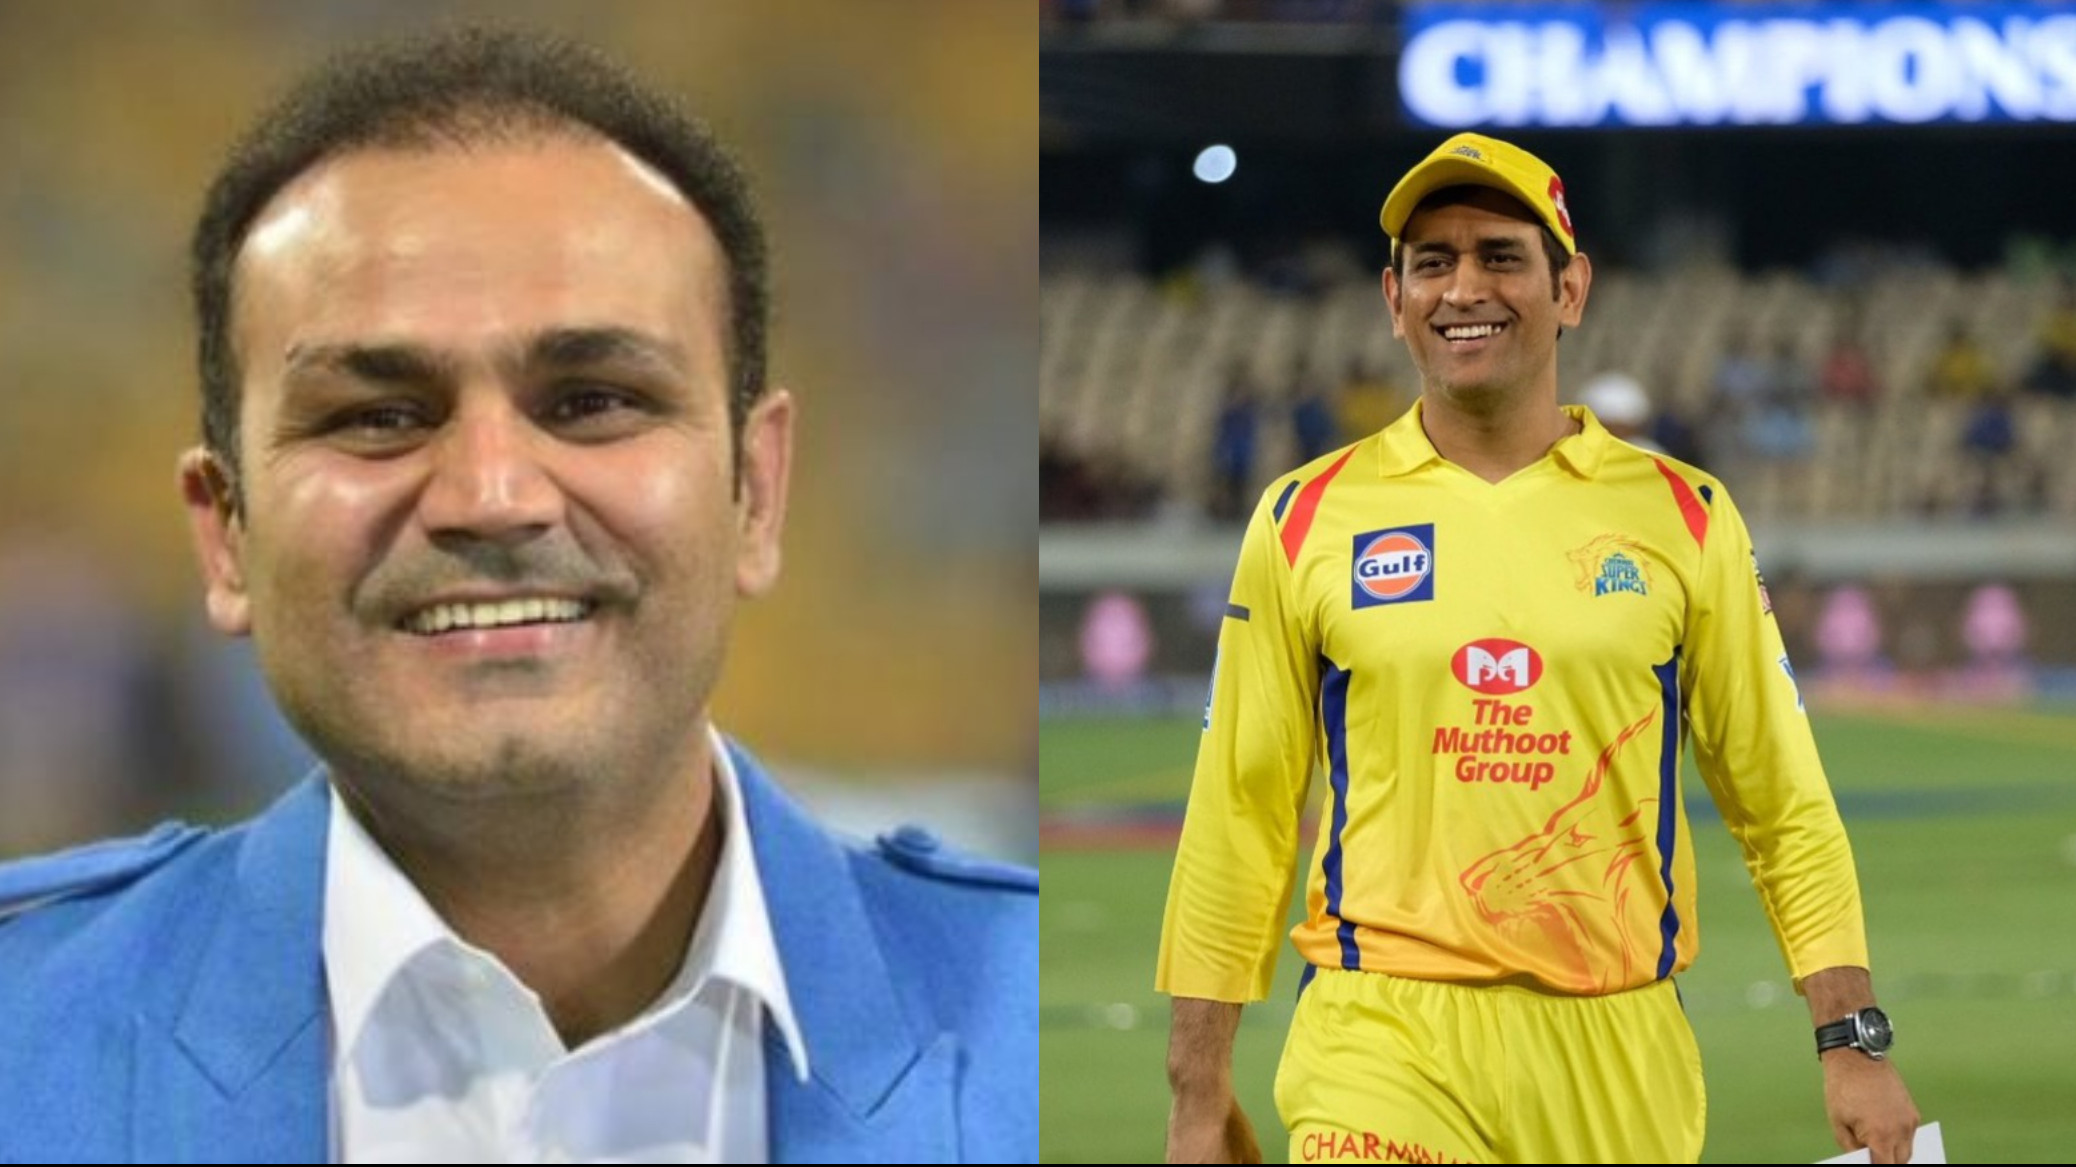 IPL 2022: “MS Dhoni’s mindset hasn’t changed since 2007”- Sehwag on what made Dhoni special